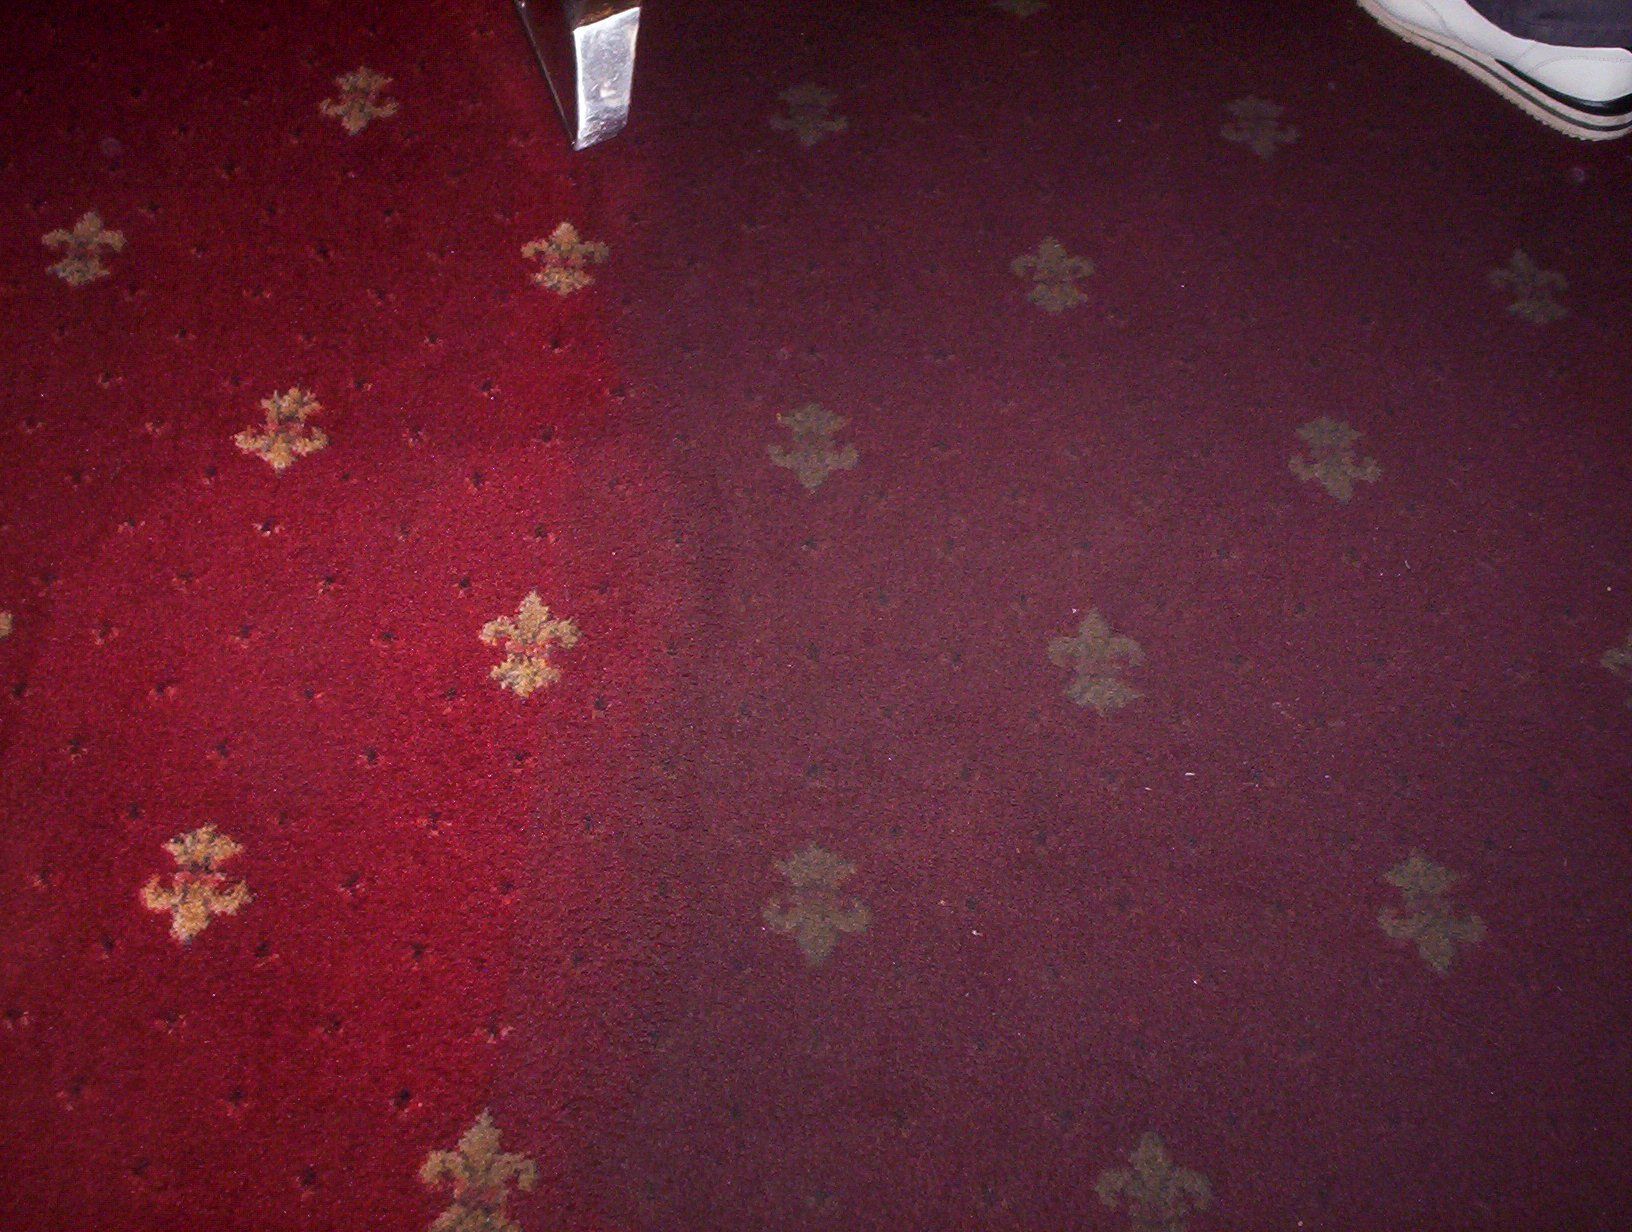 Carpet cleaners in Yeovil, Sherborne and surrounding areas within Somerset and Dorset